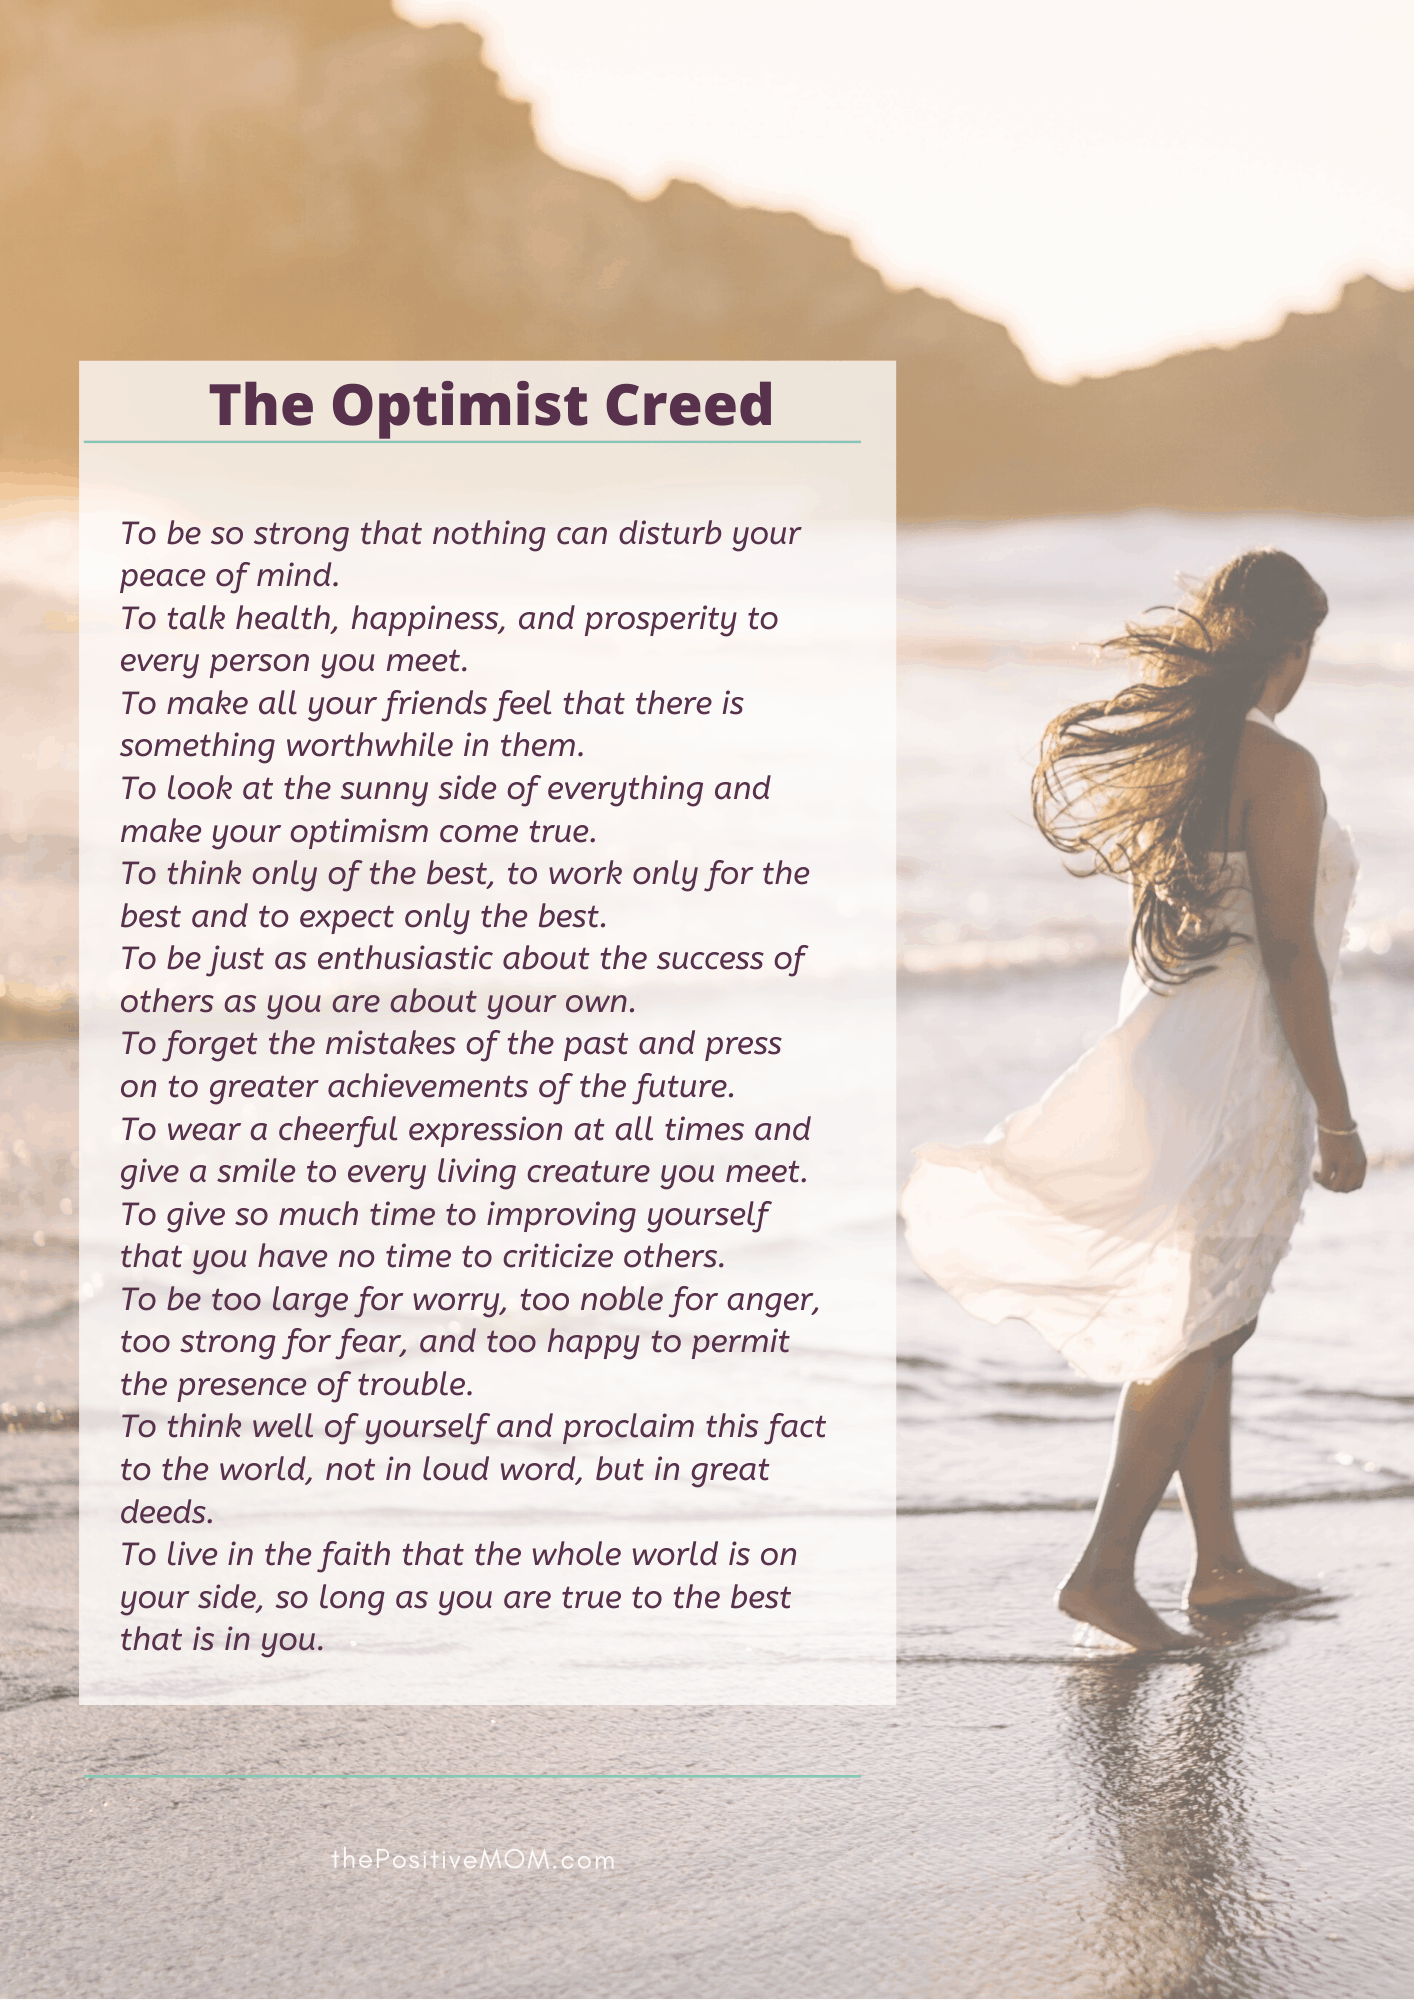 Unlock Your Positive Thinking With The Optimist Creed - Free printable